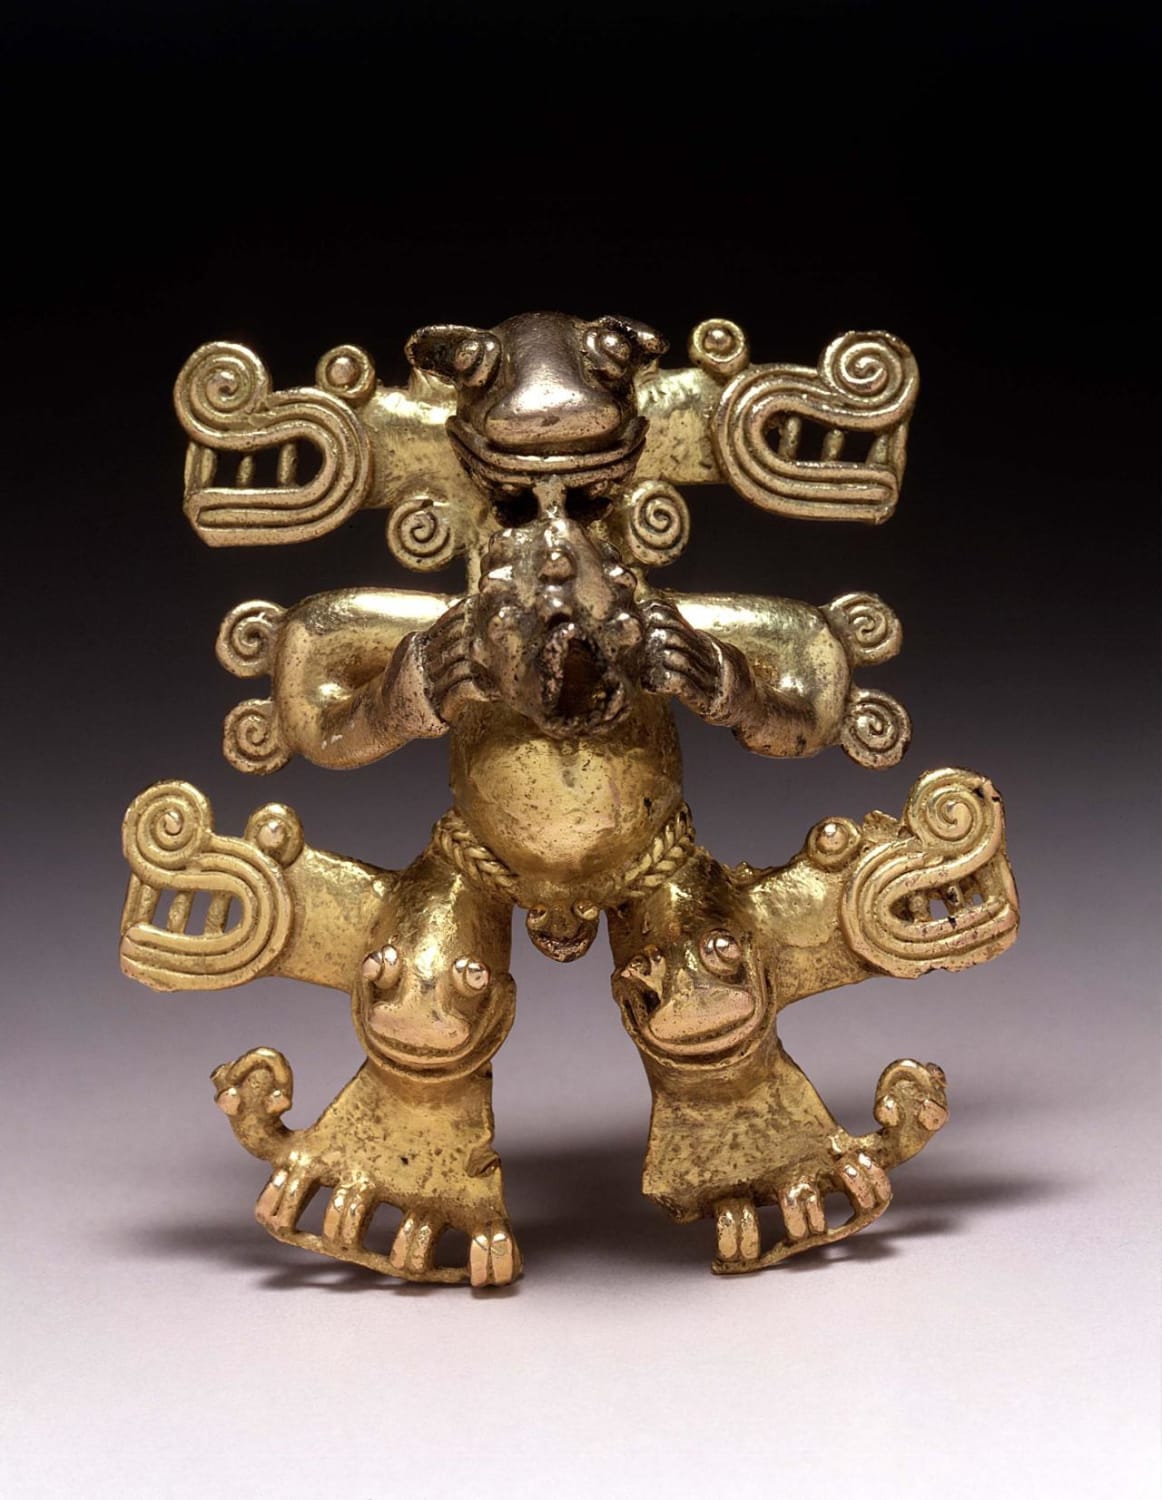 Gold pendant featuring a masked figure blowing a conch shell 'trumpet', Diquis-Chiriqui (Costa Rica/Panama), 700-1500, from Dumbarton Oaks Museum.